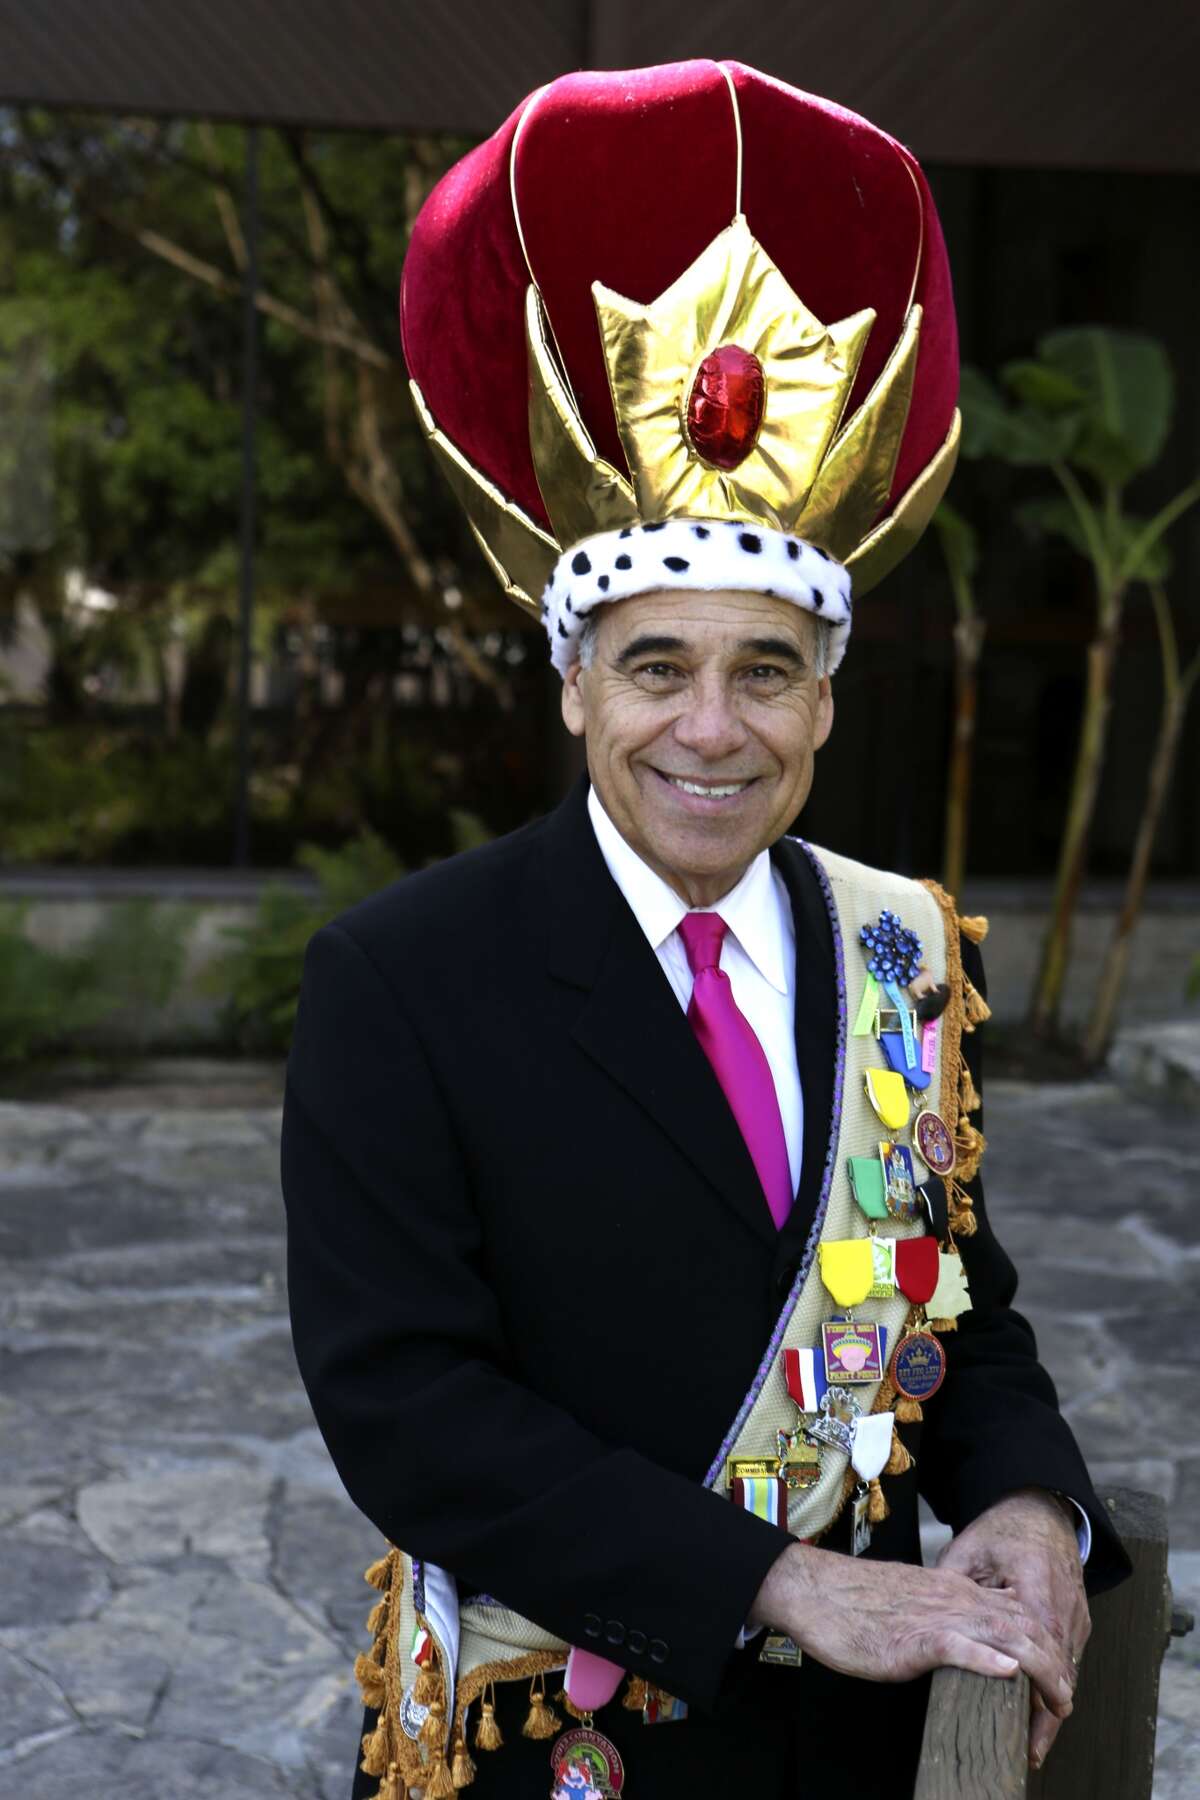 This year's King Anchovy is former U.S. Rep. Charlie Gonzalez.